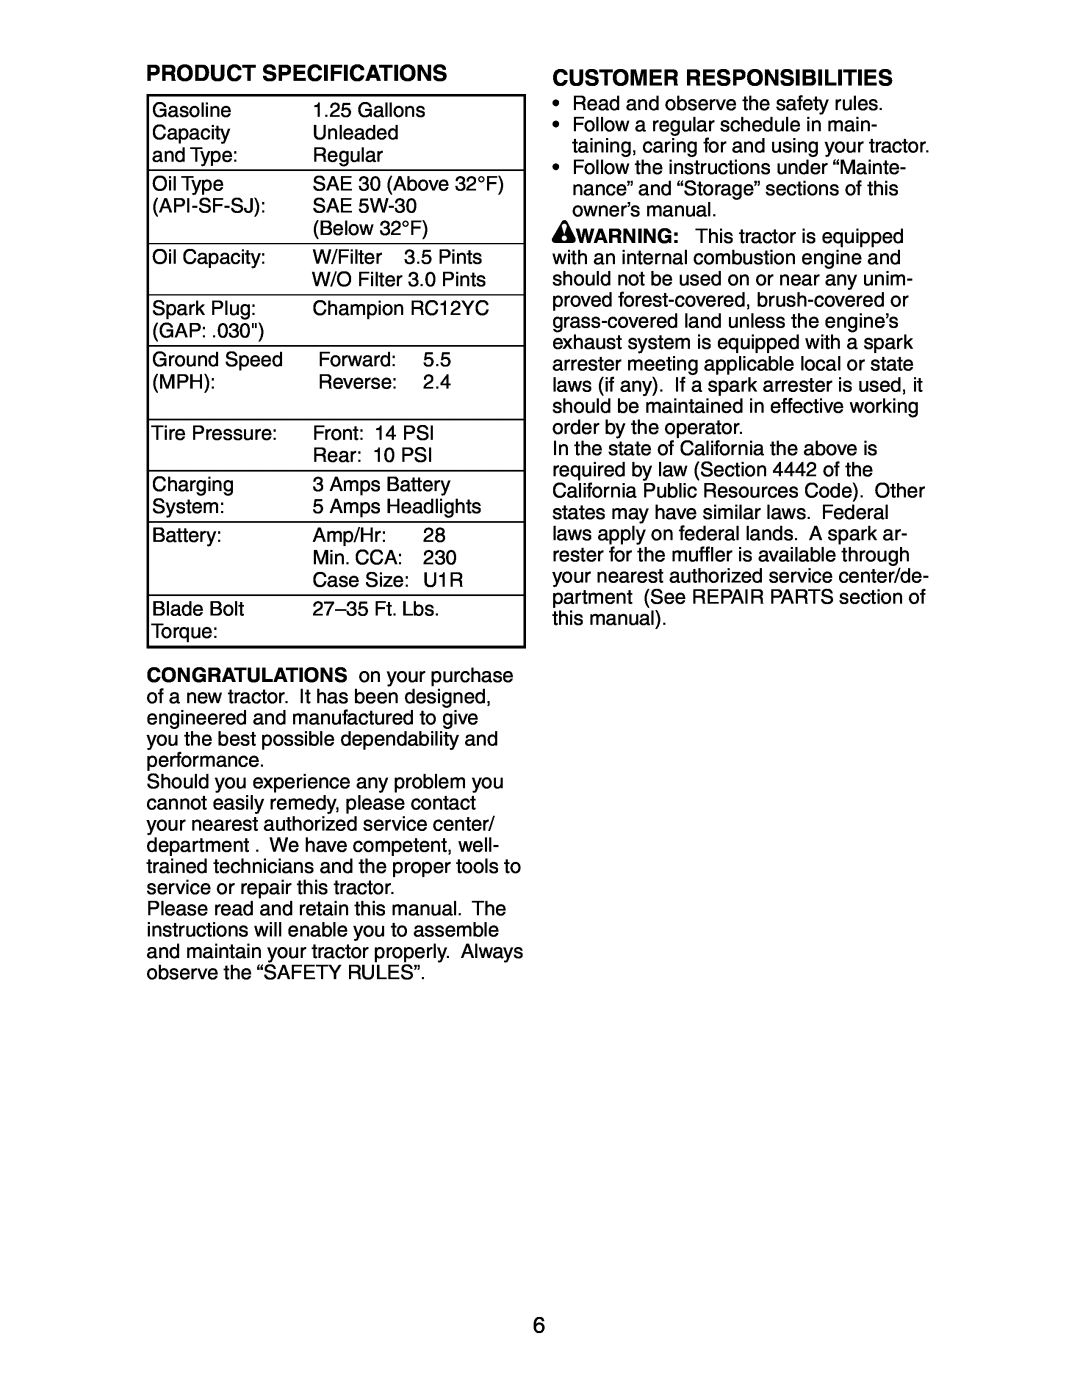 Poulan 191663 manual Product Specifications, Customer Responsibilities 